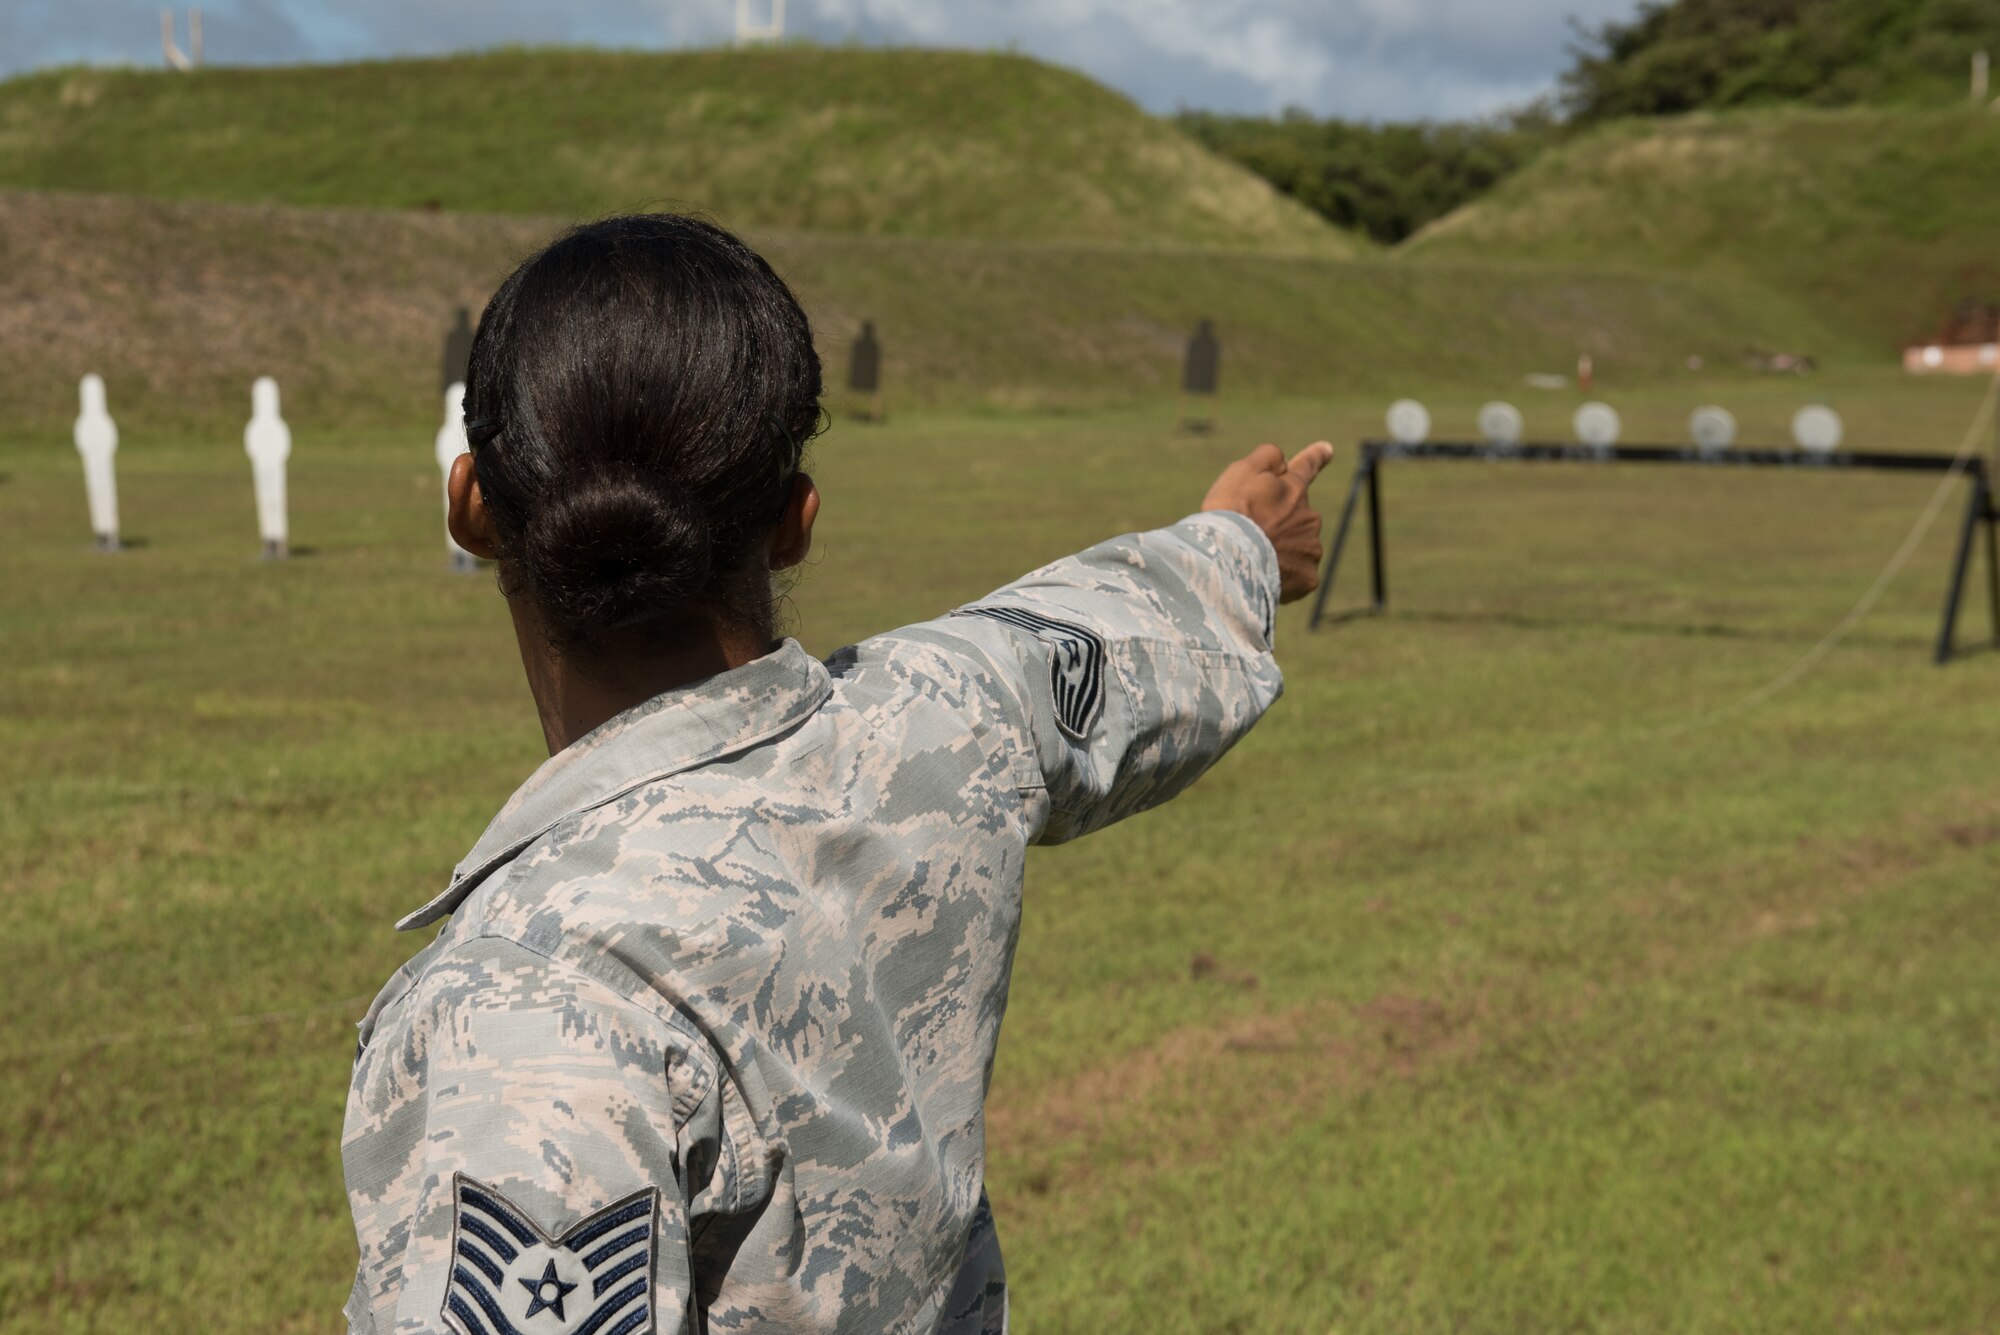 U.S. Air Force Tech. Sgt. Yerida Vazquez, 36th Security Forces Squadron NCO in charge of combat arms, visualizes making a single-arm pistol shot before a shooting competition April 29, 2017, at Naval Computer and Telecommunications Station, Guam. During the relay stage of the shooting competition, four-person teams raced against the clock as they switched between the rifle, shotgun and two pistol stages. (U.S. Air Force photo by Airman 1st Class Jacob Skovo)